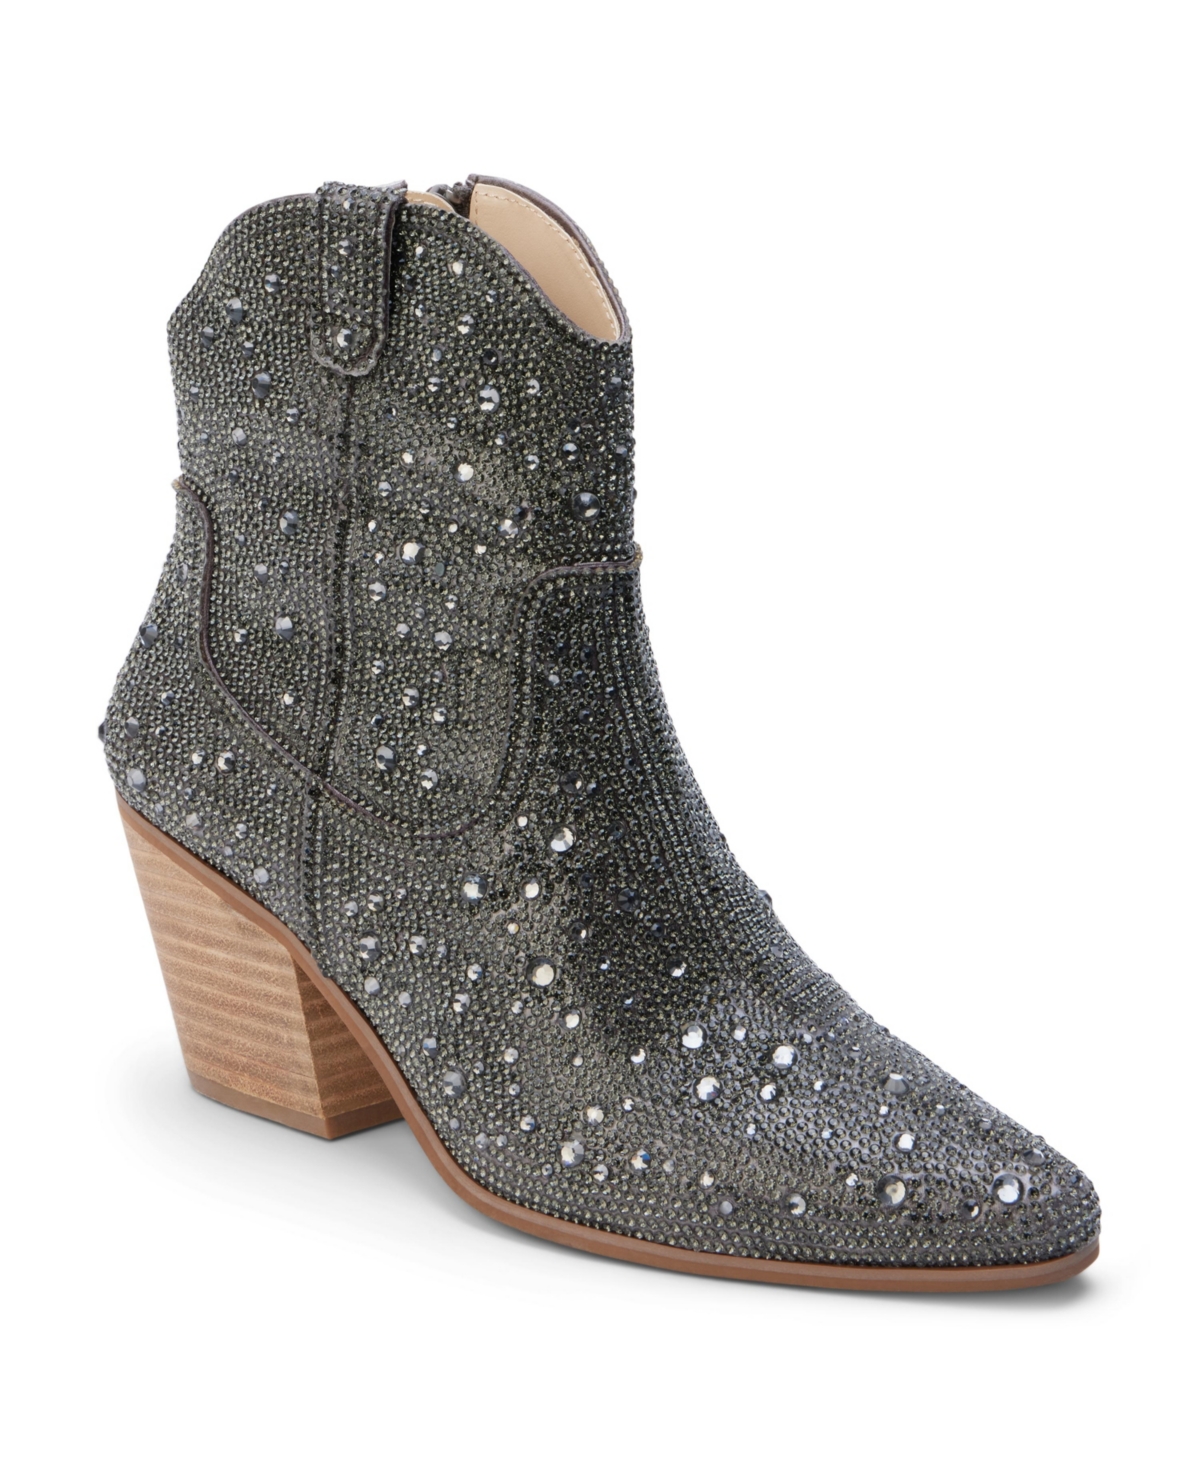 Harlow Womens Ankle Boots - Smoke